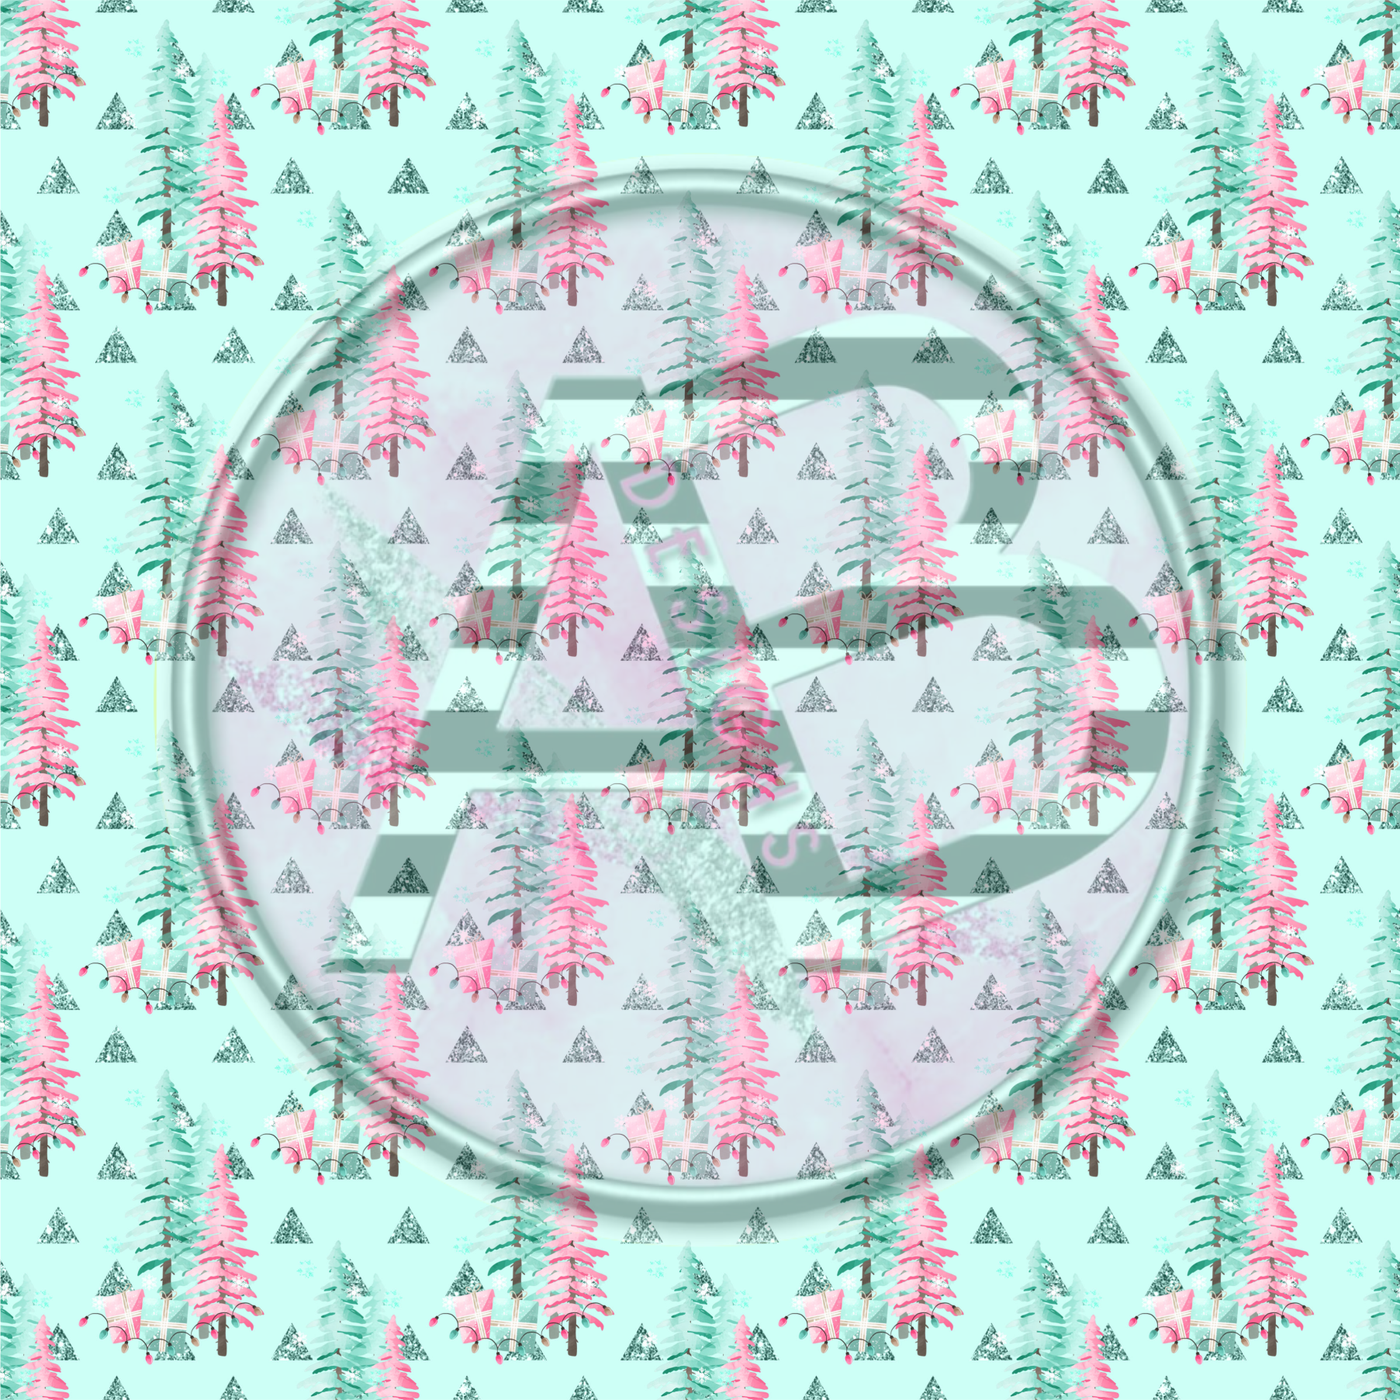 Adhesive Patterned Vinyl -  Minty Christmas 8